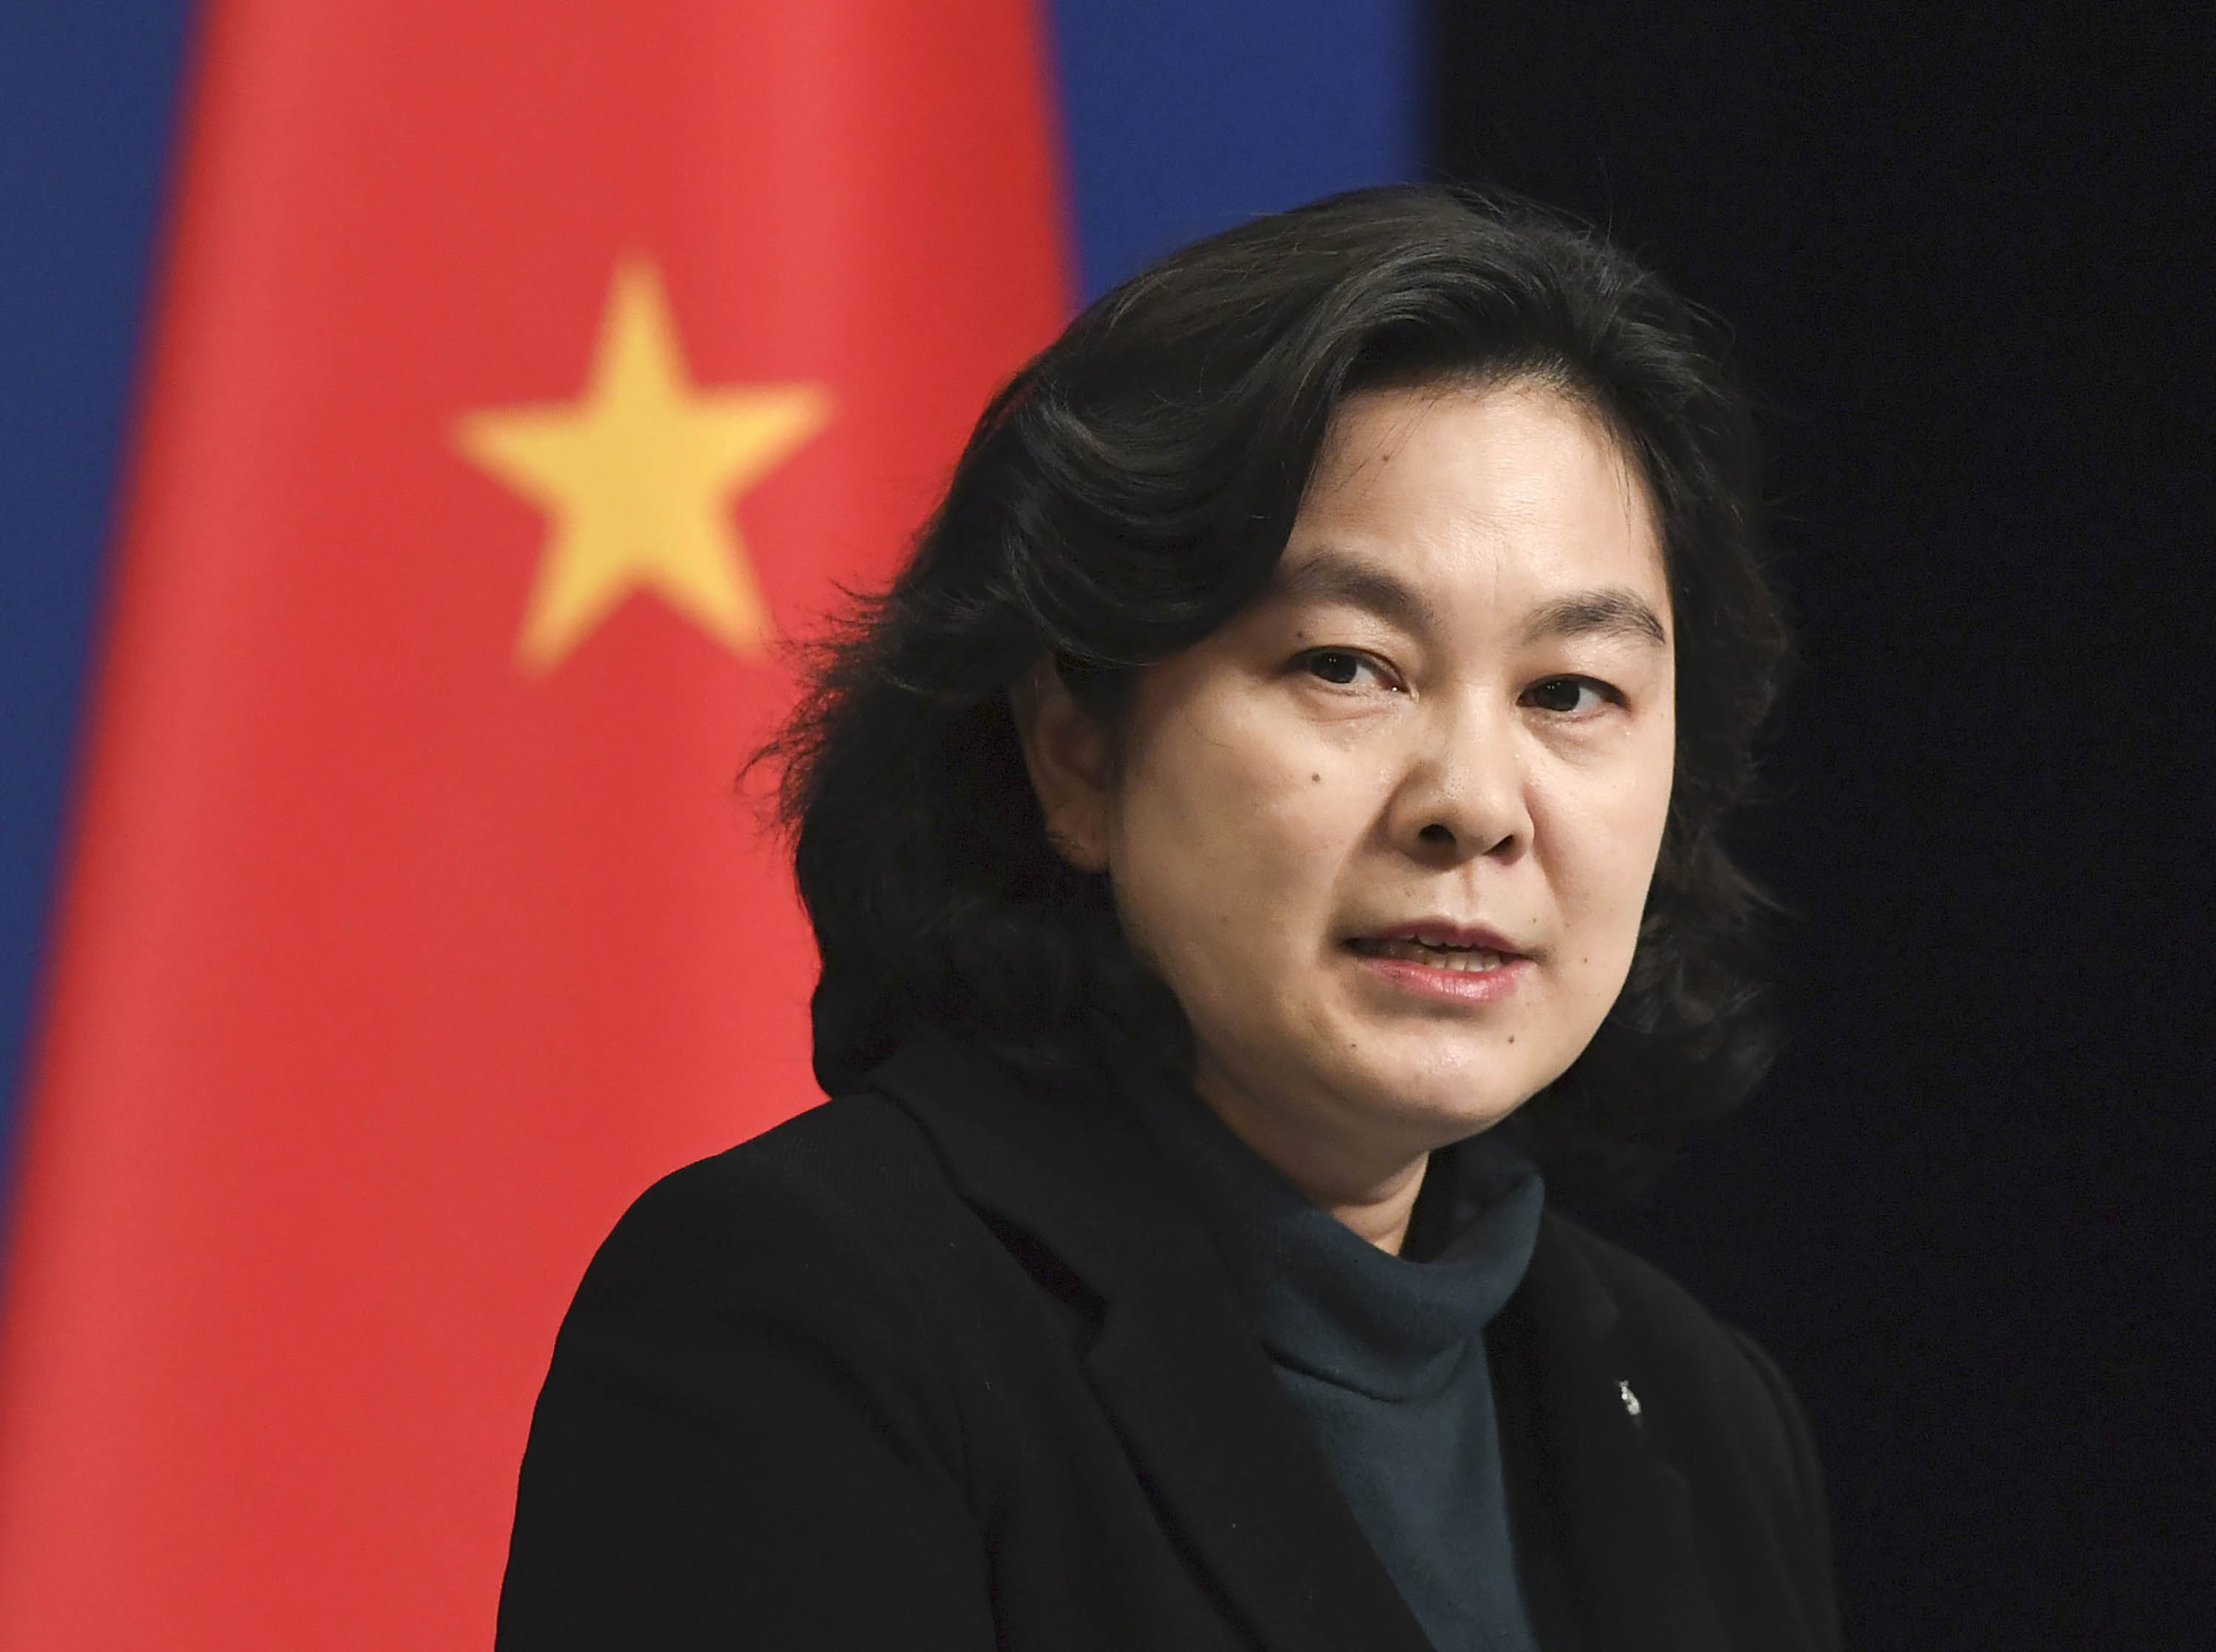 Chinese Foreign Ministry spokeswoman Hua Chunying speaks at a press conference in Beijing on March 30.